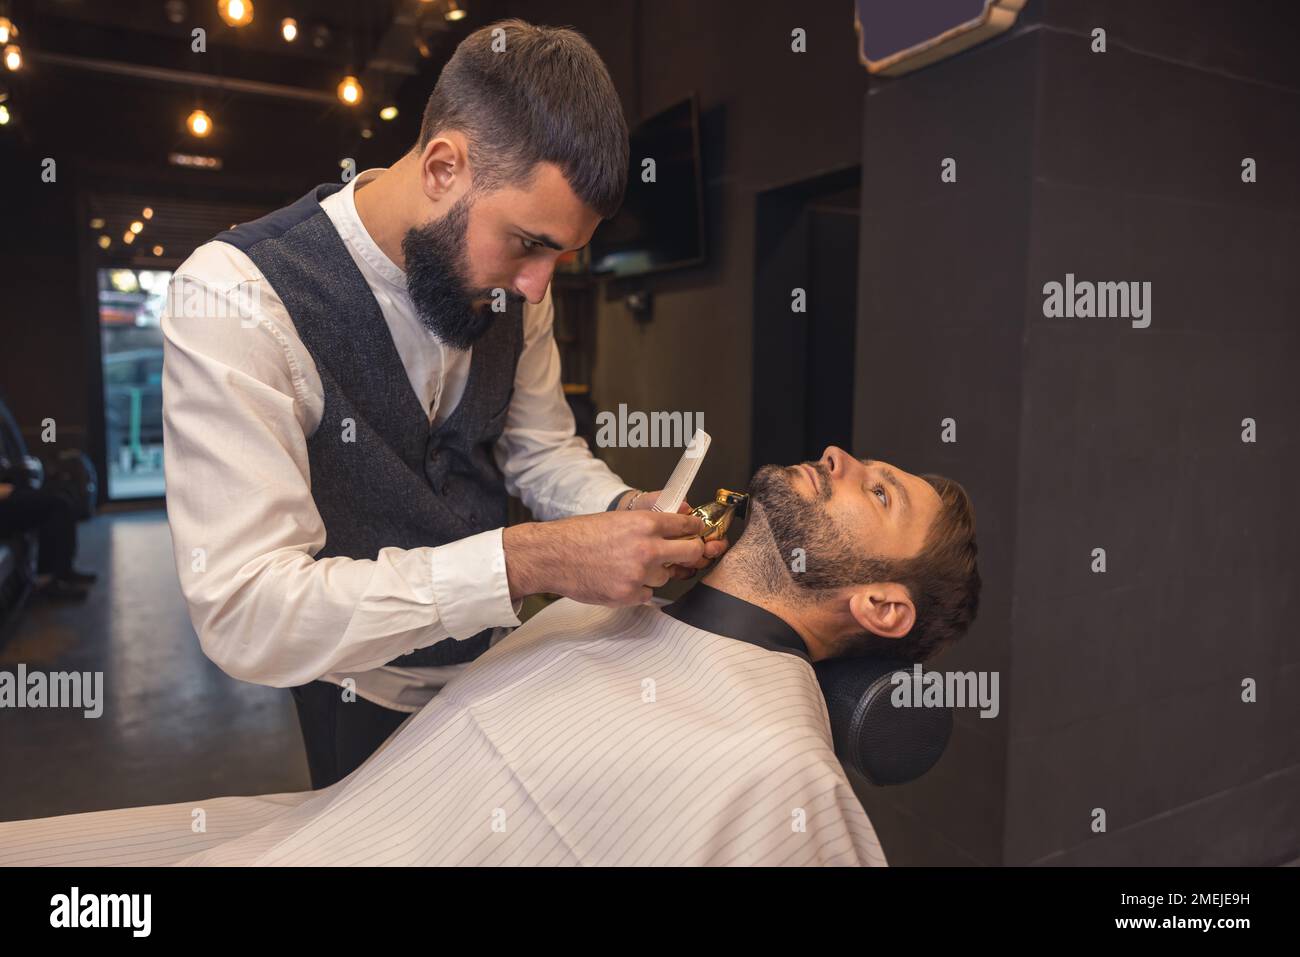 Professional barber carefully trimming the clients beard Stock Photo